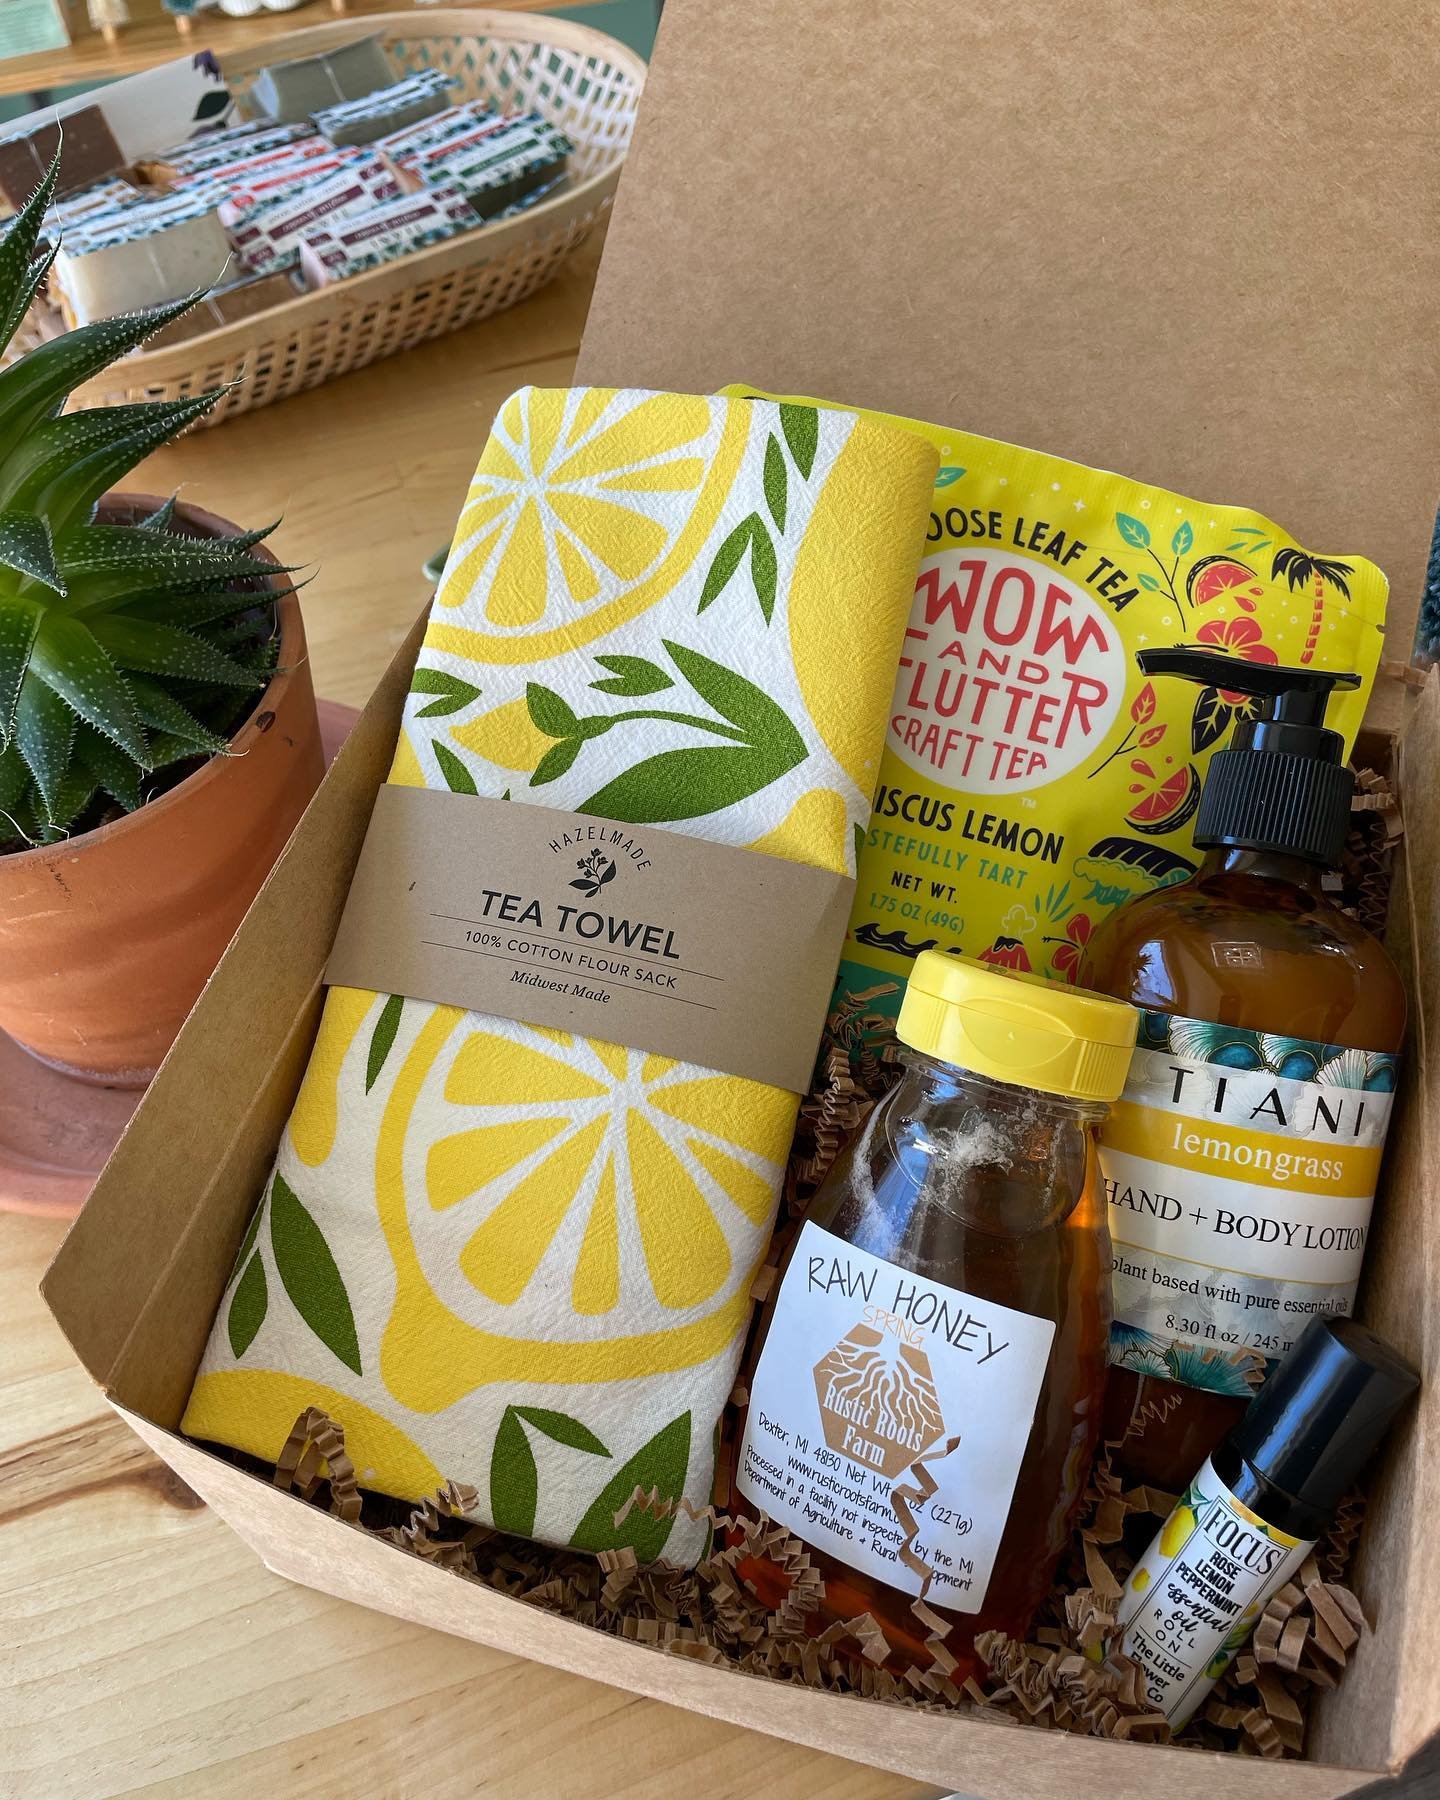 Procrastinators like you shouldn&rsquo;t be so lucky.  Gift options like this showing up so late just perpetuates your risky behavior. @tianibodycare just nestled W&amp;F coffee and tea into boxes of cardboard crinkle paper and other local goodies. Y